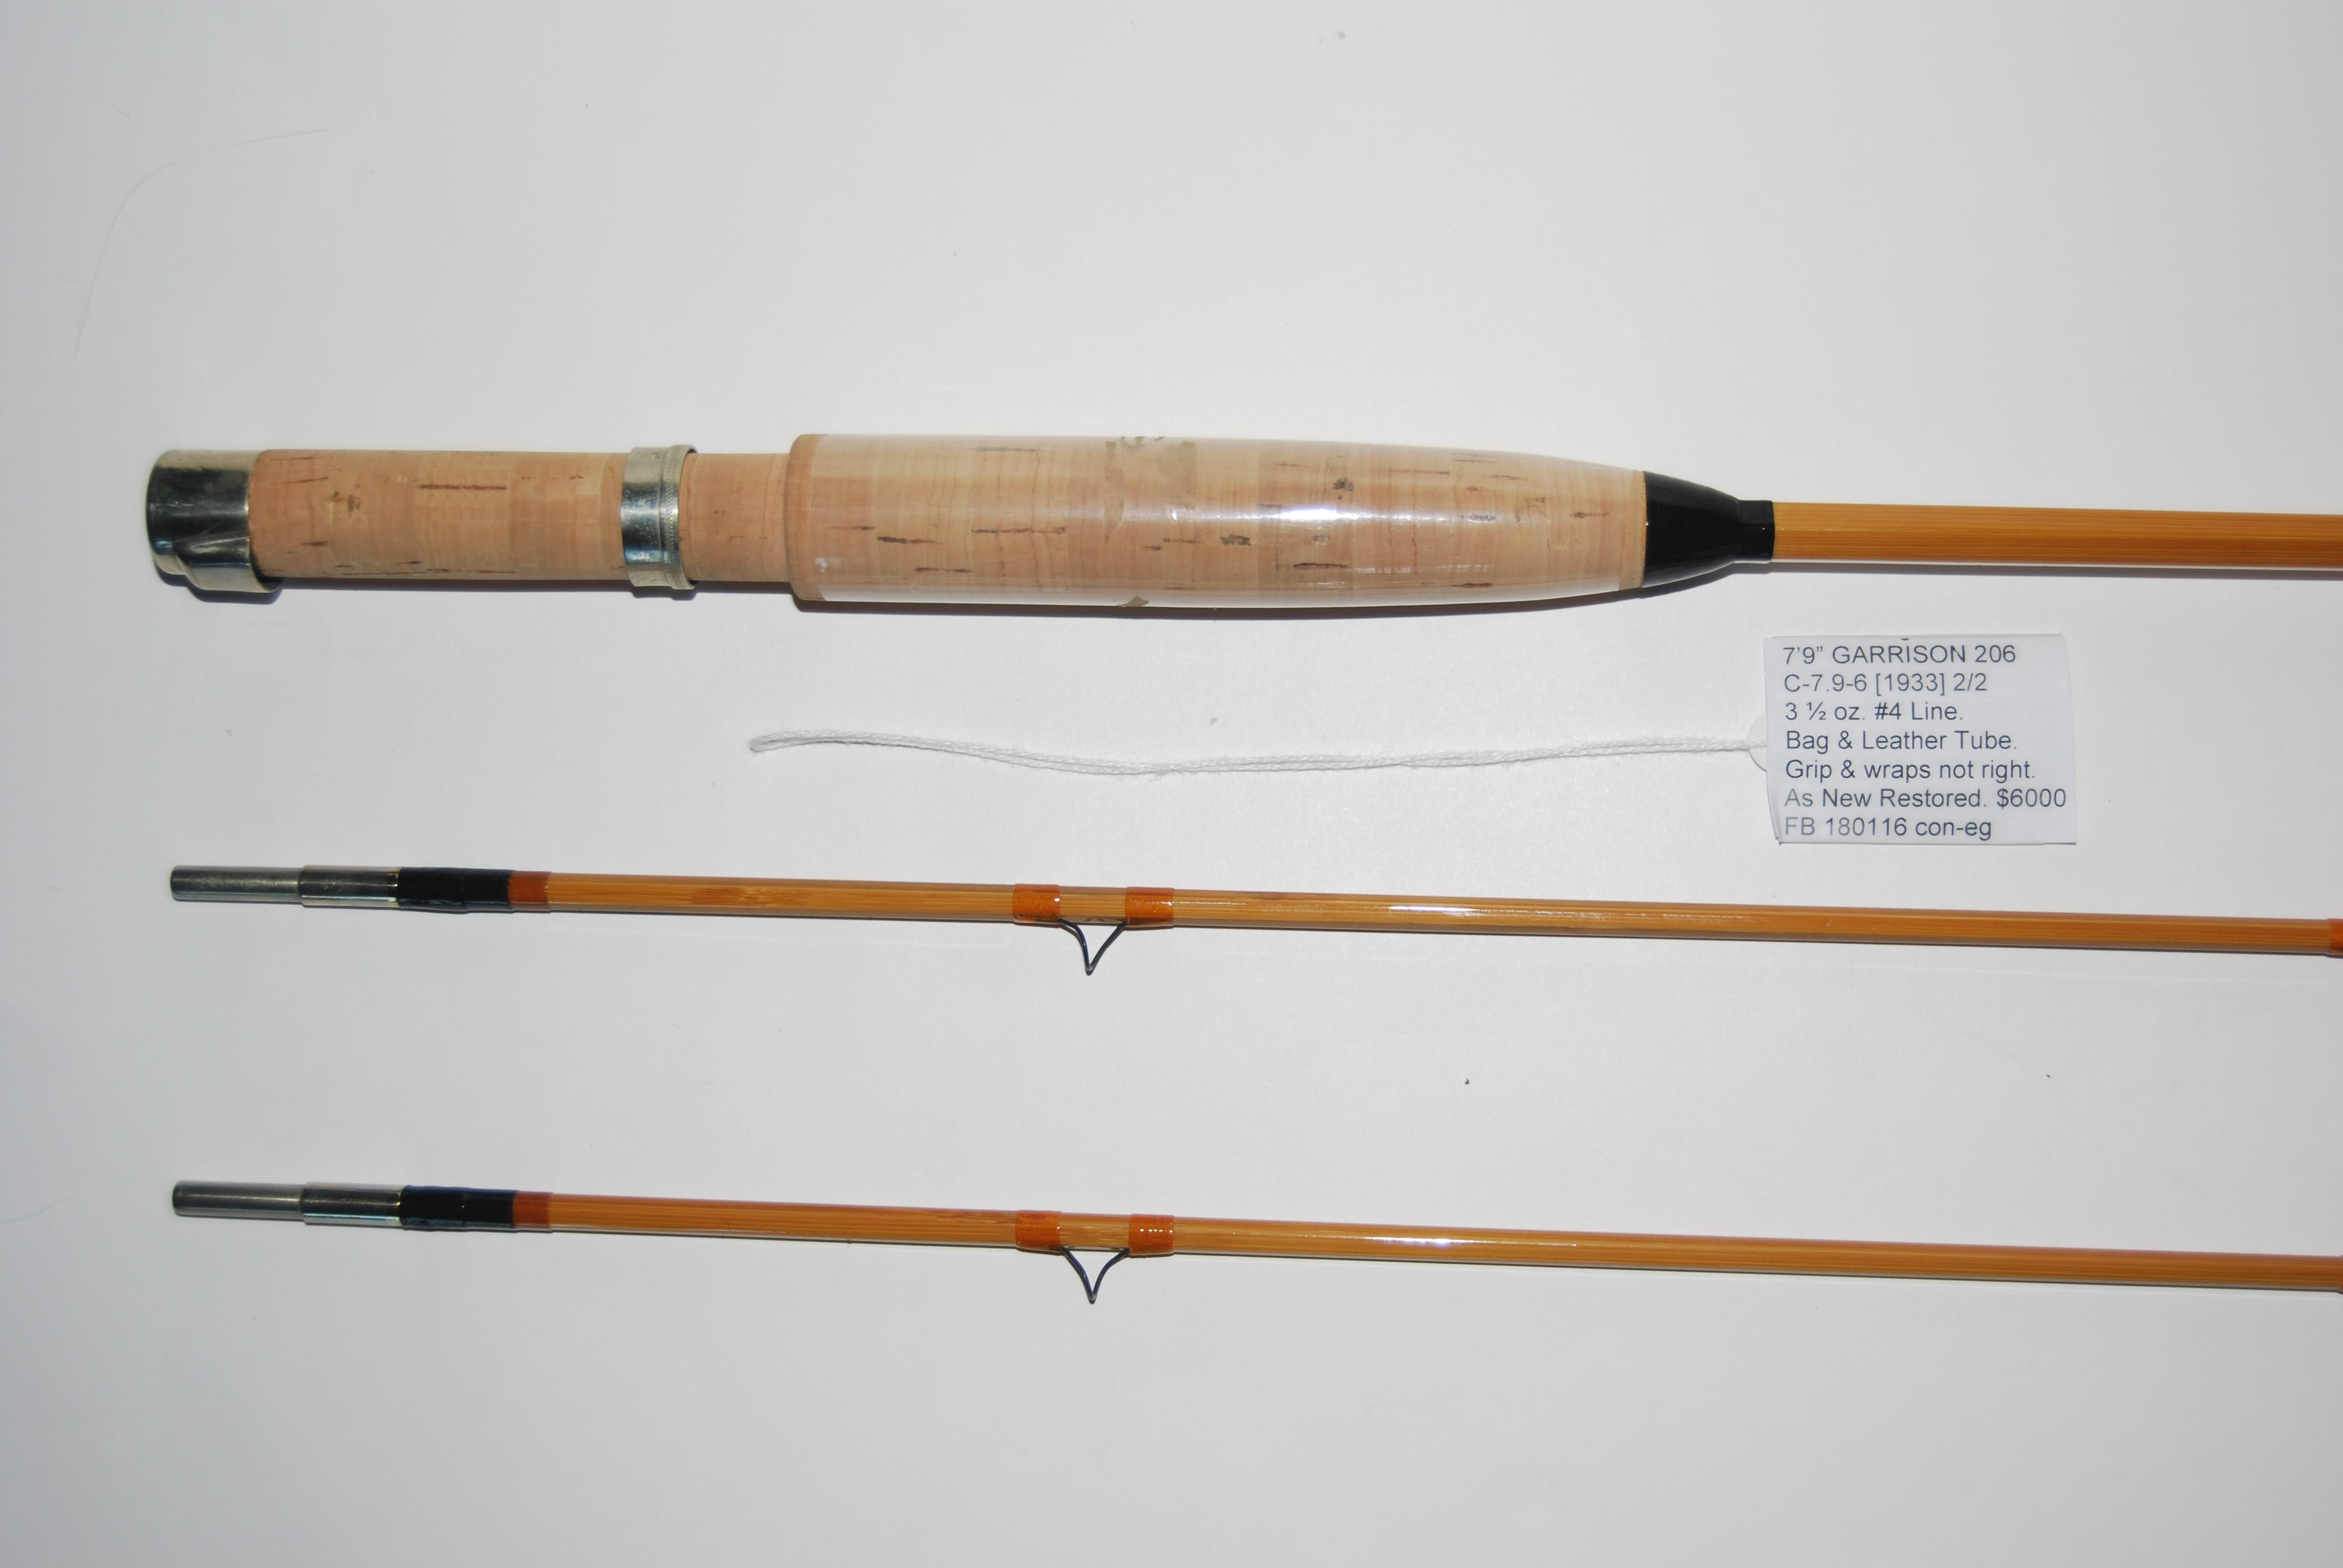 Chubb/Montague  Bamboo fly rod, Fly rods, Rods